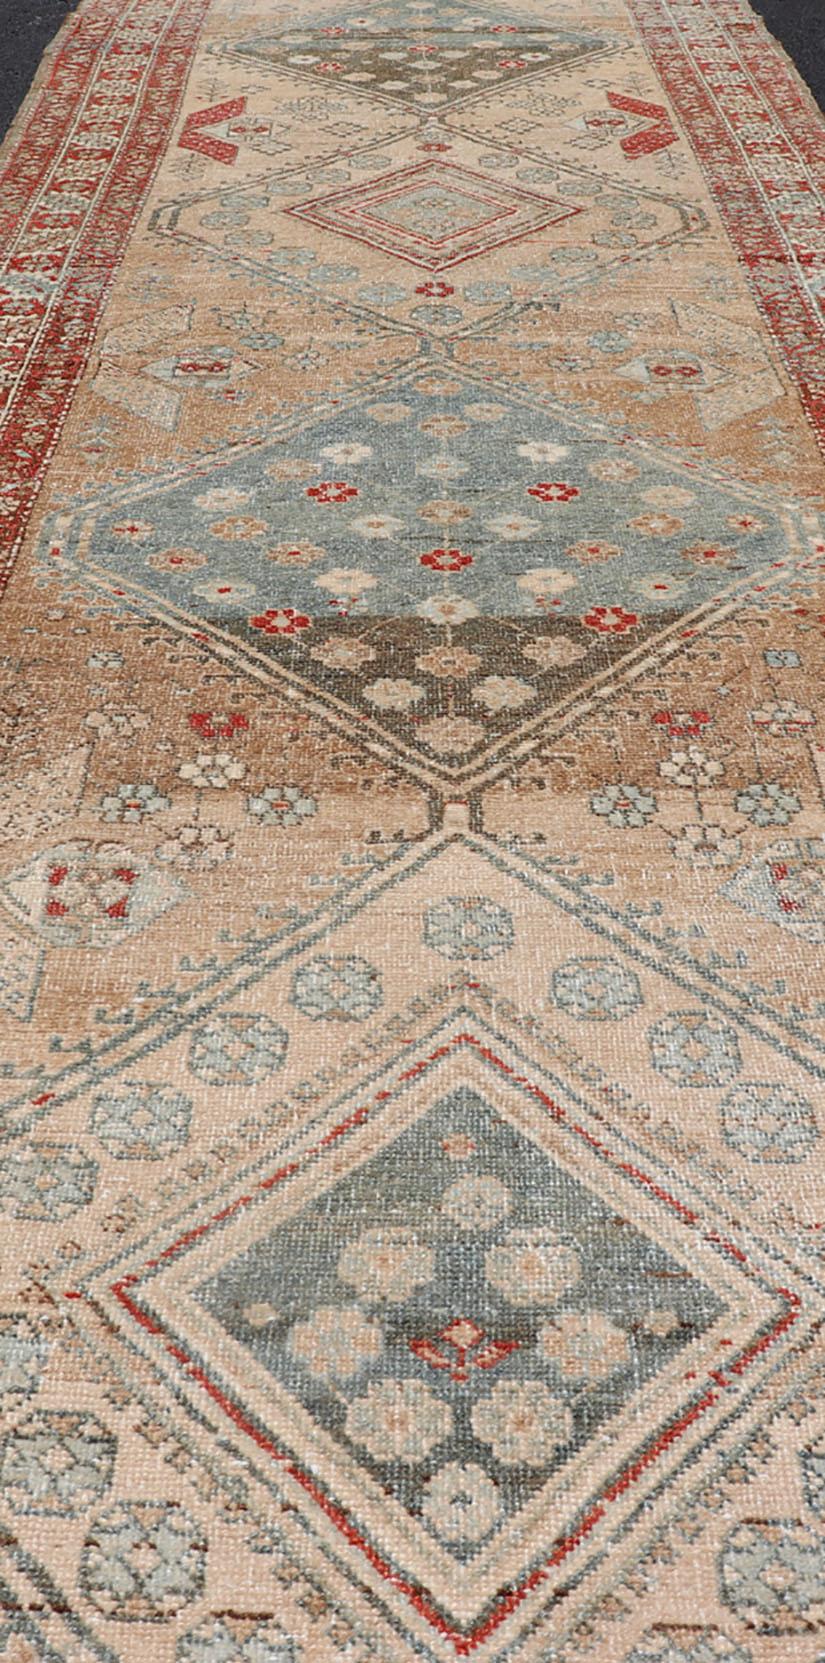 Wool Antique Persian Serab Runner with Geometric Medallion Design in Red and Tan For Sale